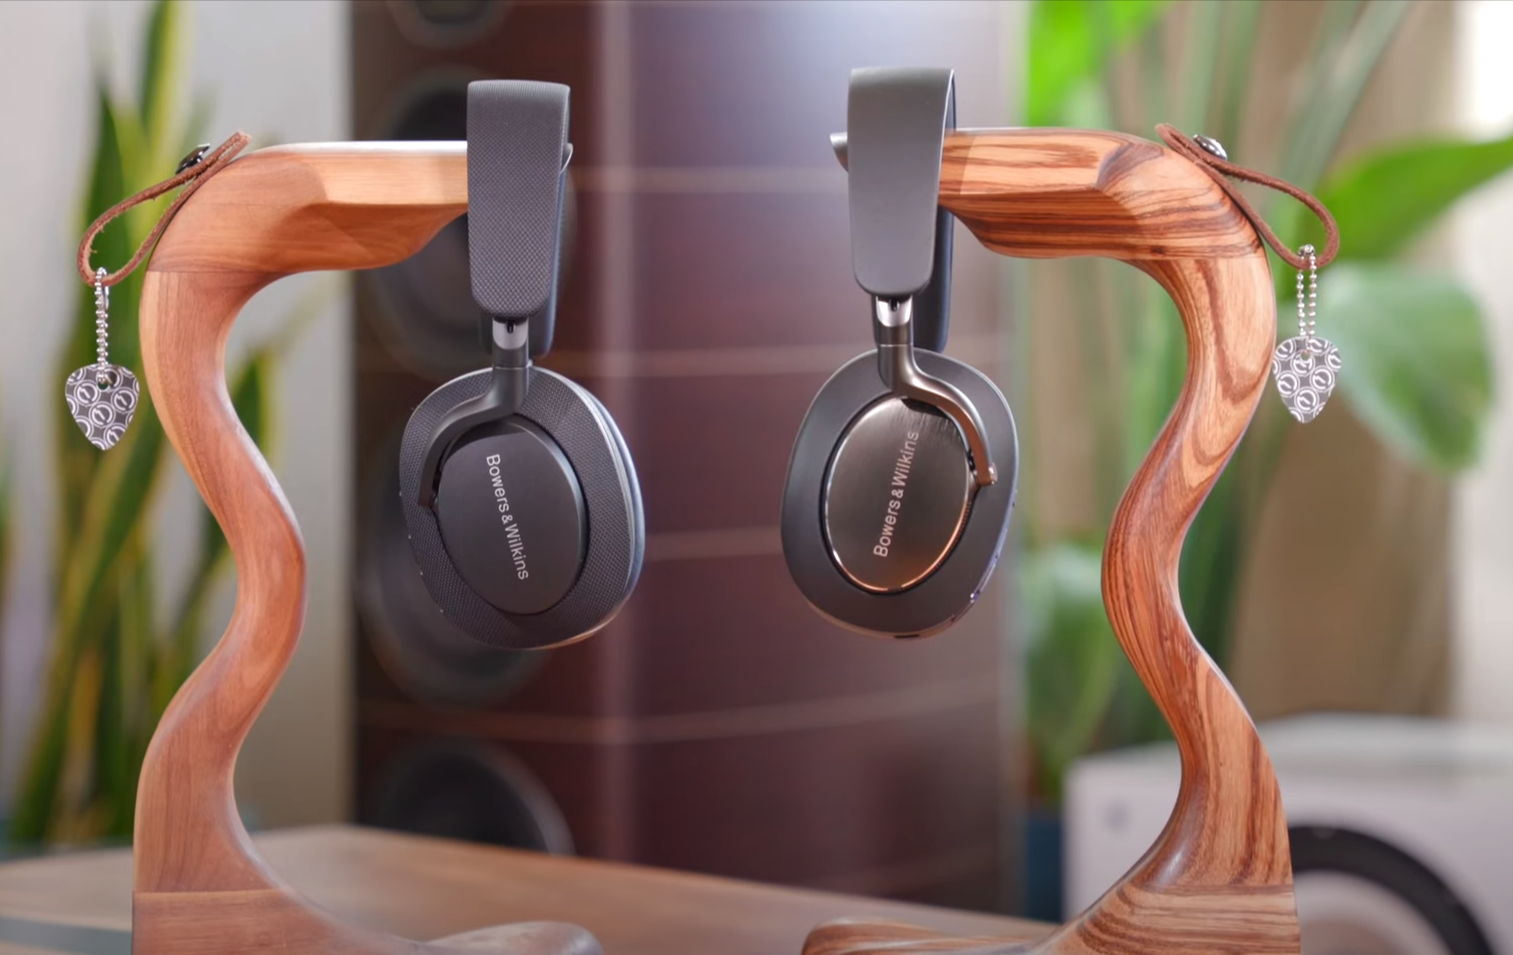 Bowers & Wilkins Px7 S2 vs. Px8 Wireless Bluetooth Active Noise Canceling headphones